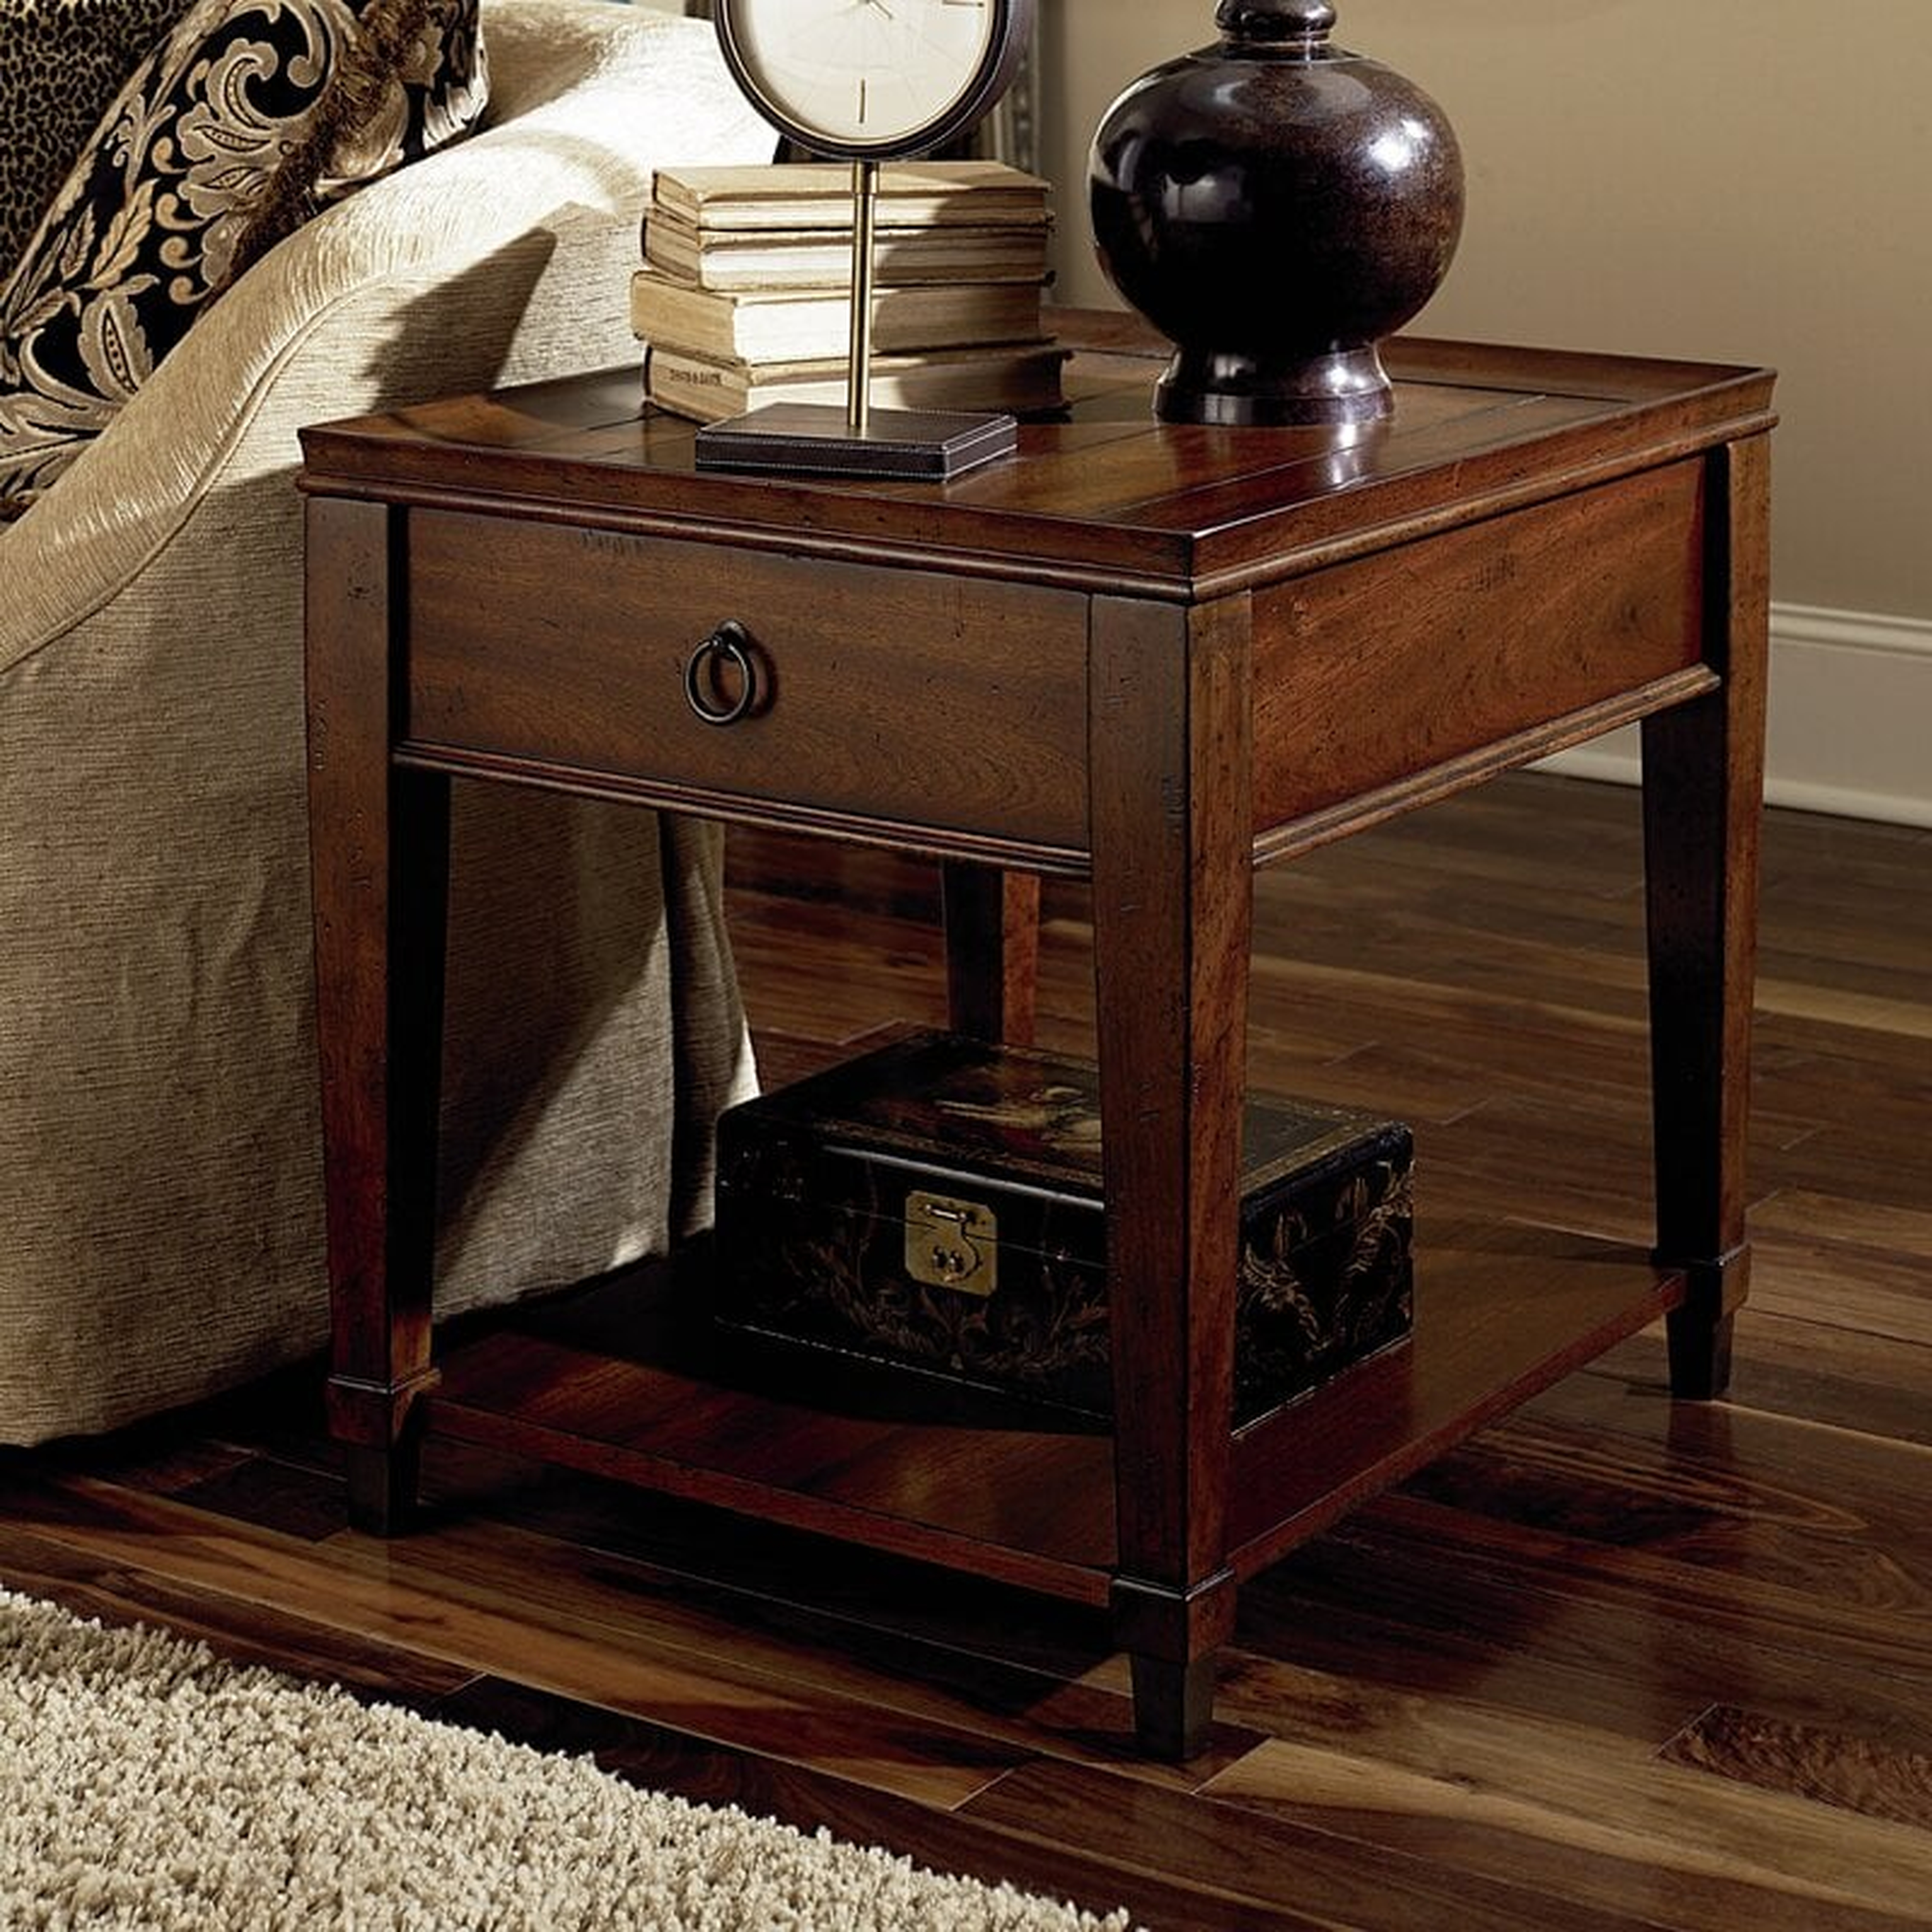 Langer End Table with Storage - Wayfair